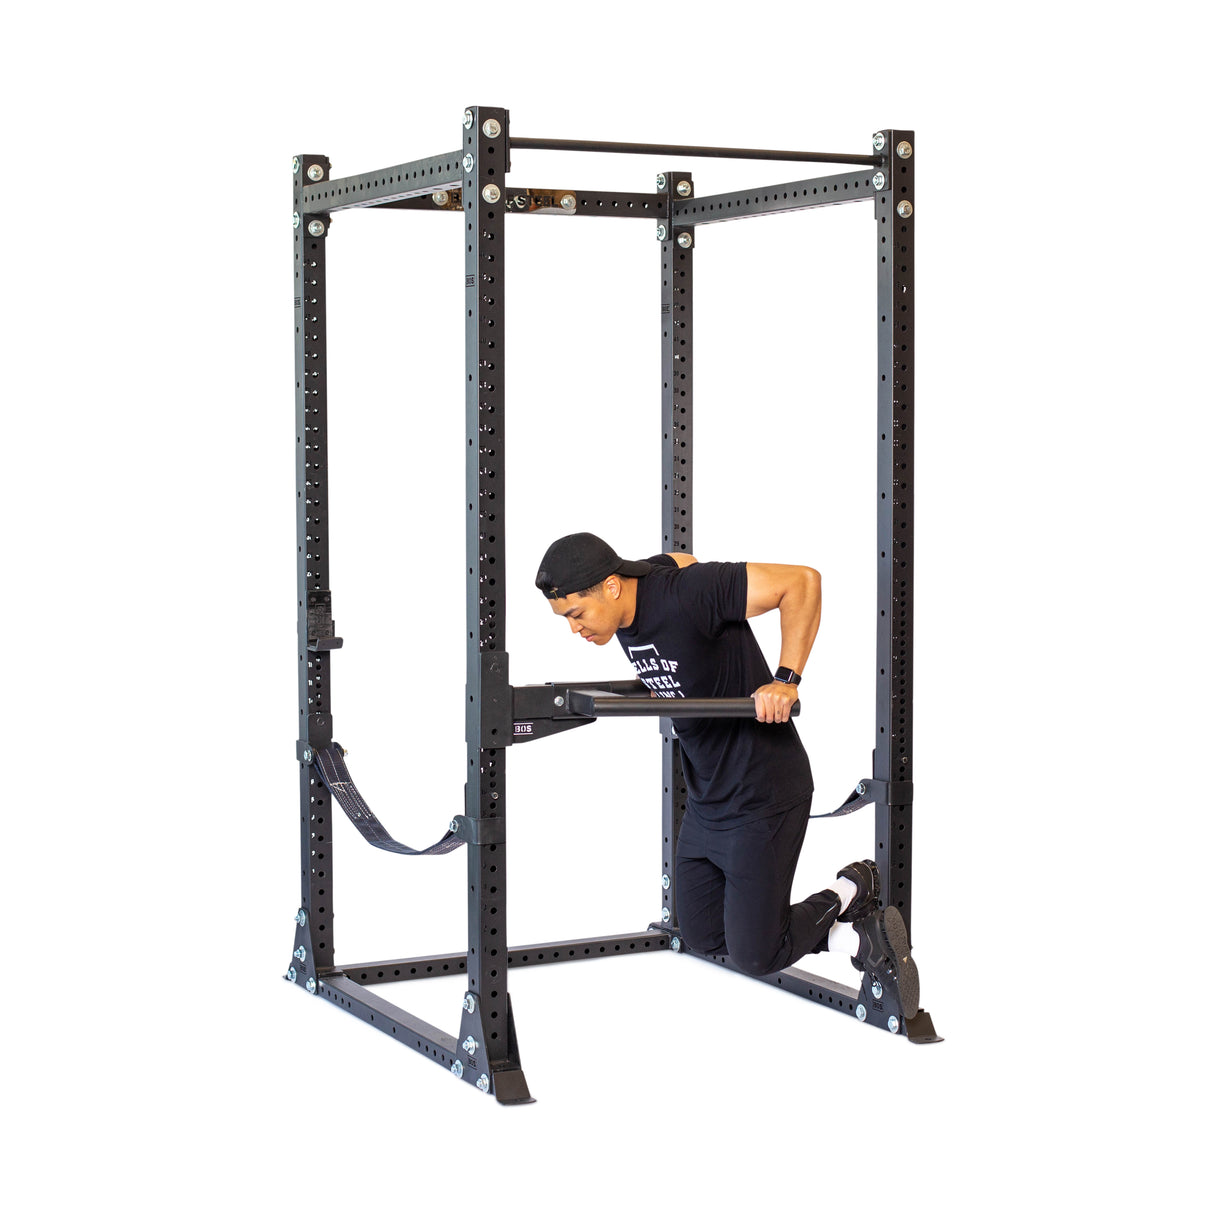 Athlete performing dips with Manticore Y Dip Bar Rack Attachment.